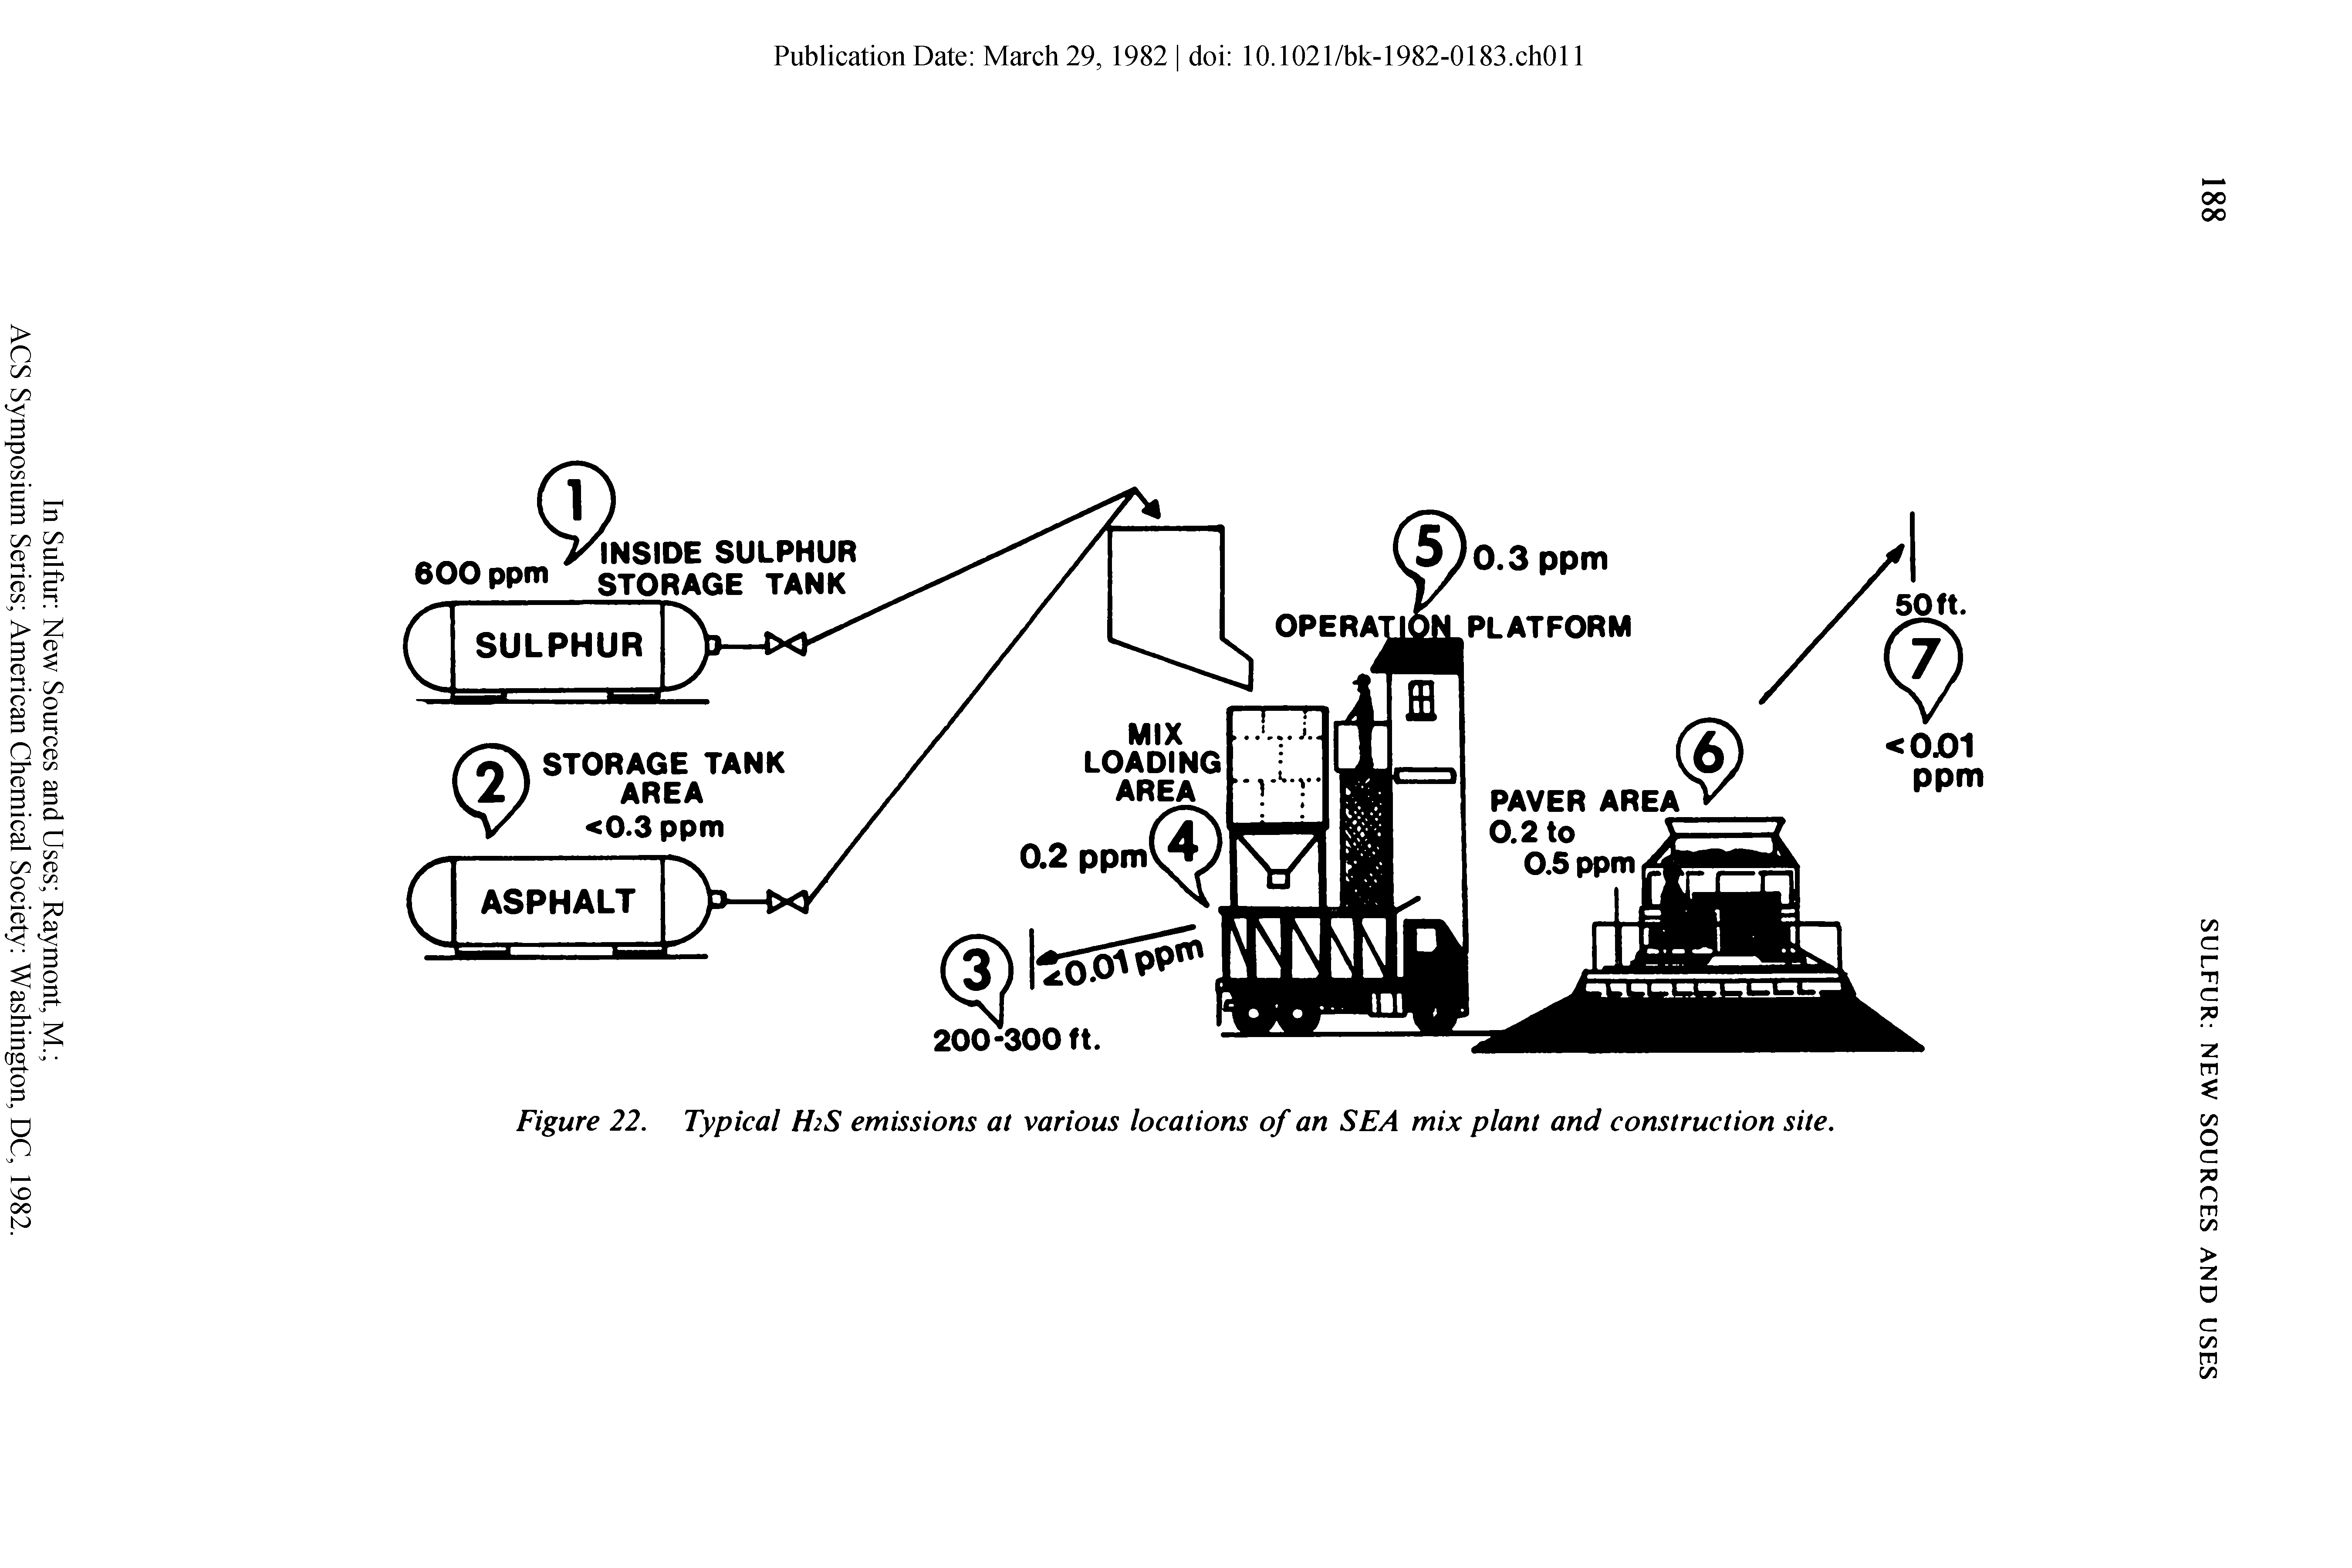 Figure 22. Typical H2S emissions at various locations of an SEA mix plant and construction site.